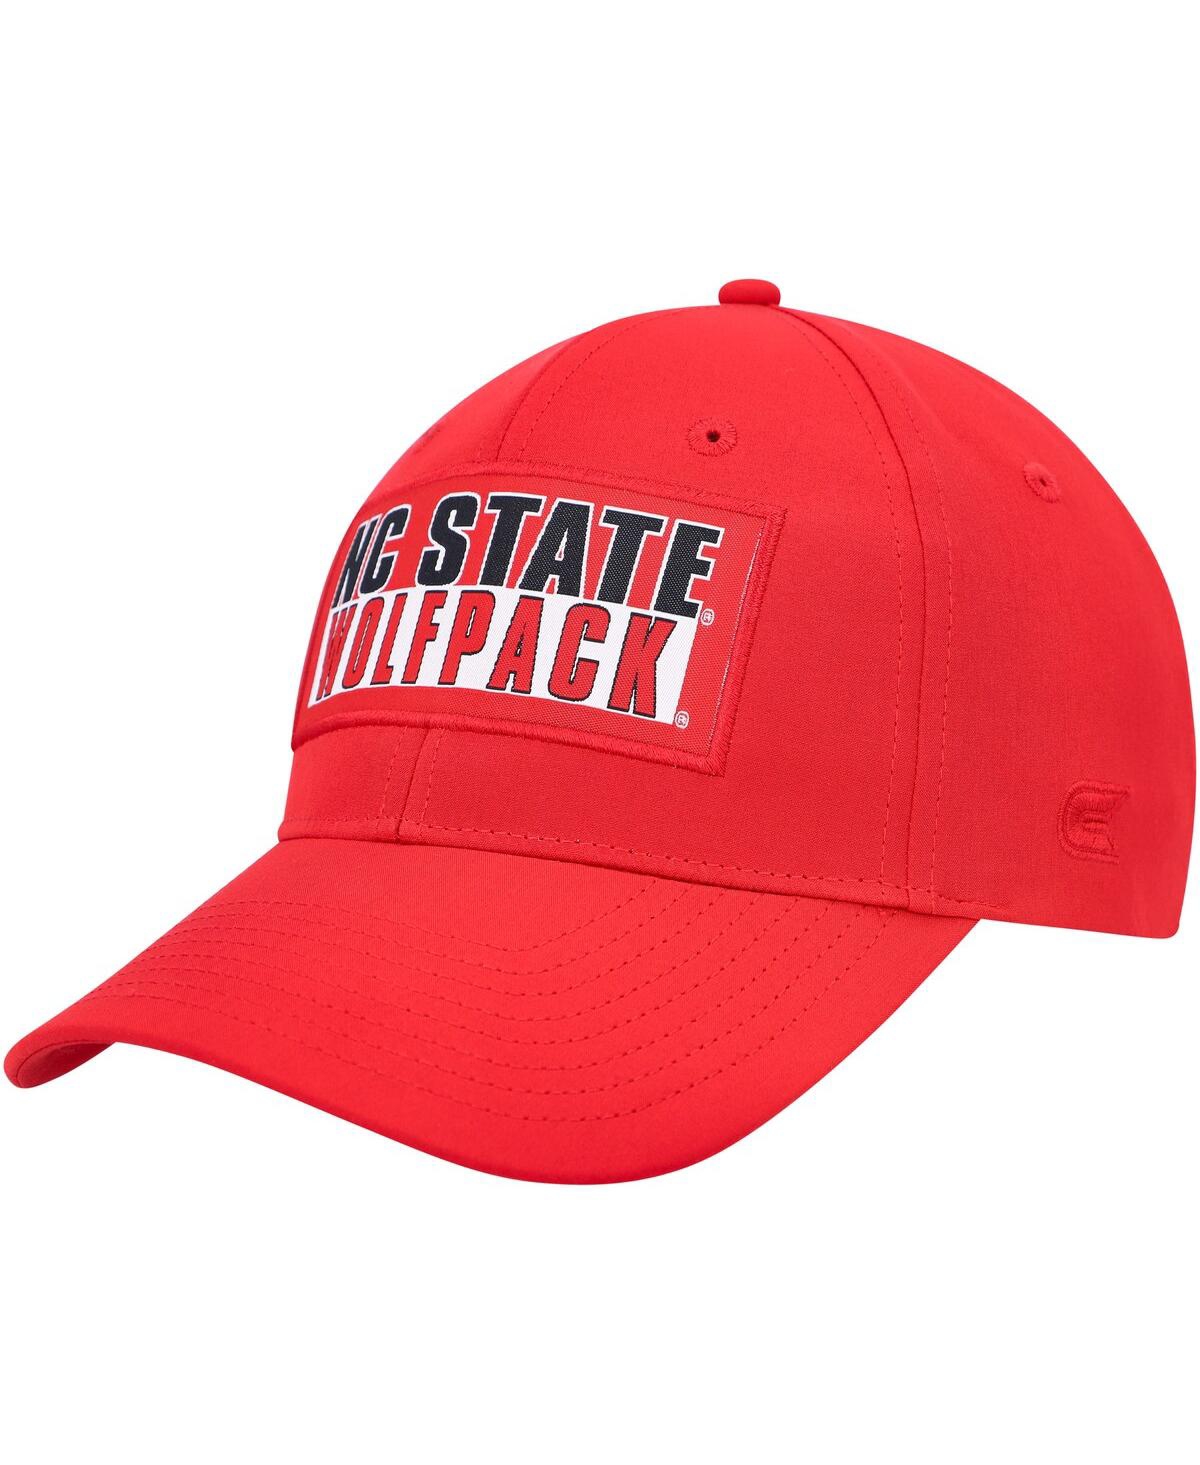 Shop Colosseum Men's  Red Nc State Wolfpack Positraction Snapback Hat